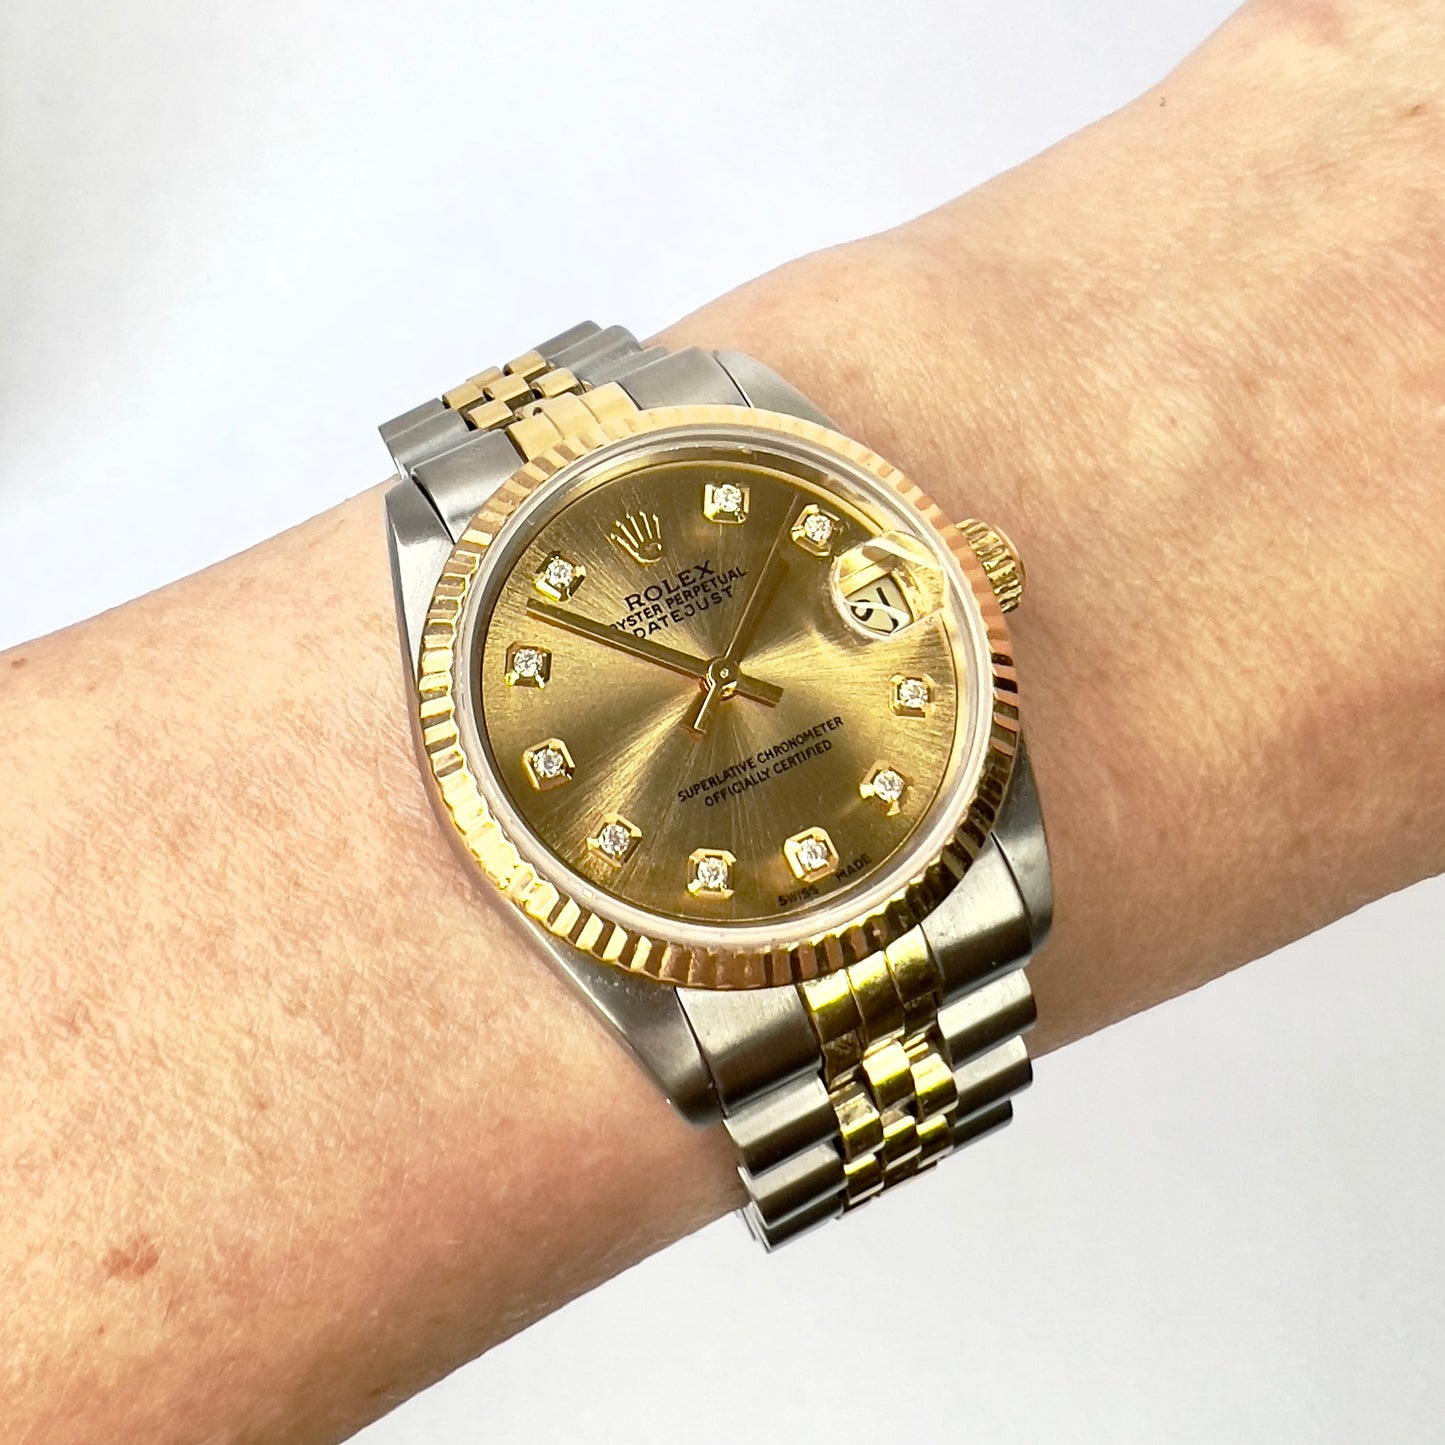 ROLEX Oyster Perpetual DATEJUST Automatic 31mm 2 Tone Diamond Watch